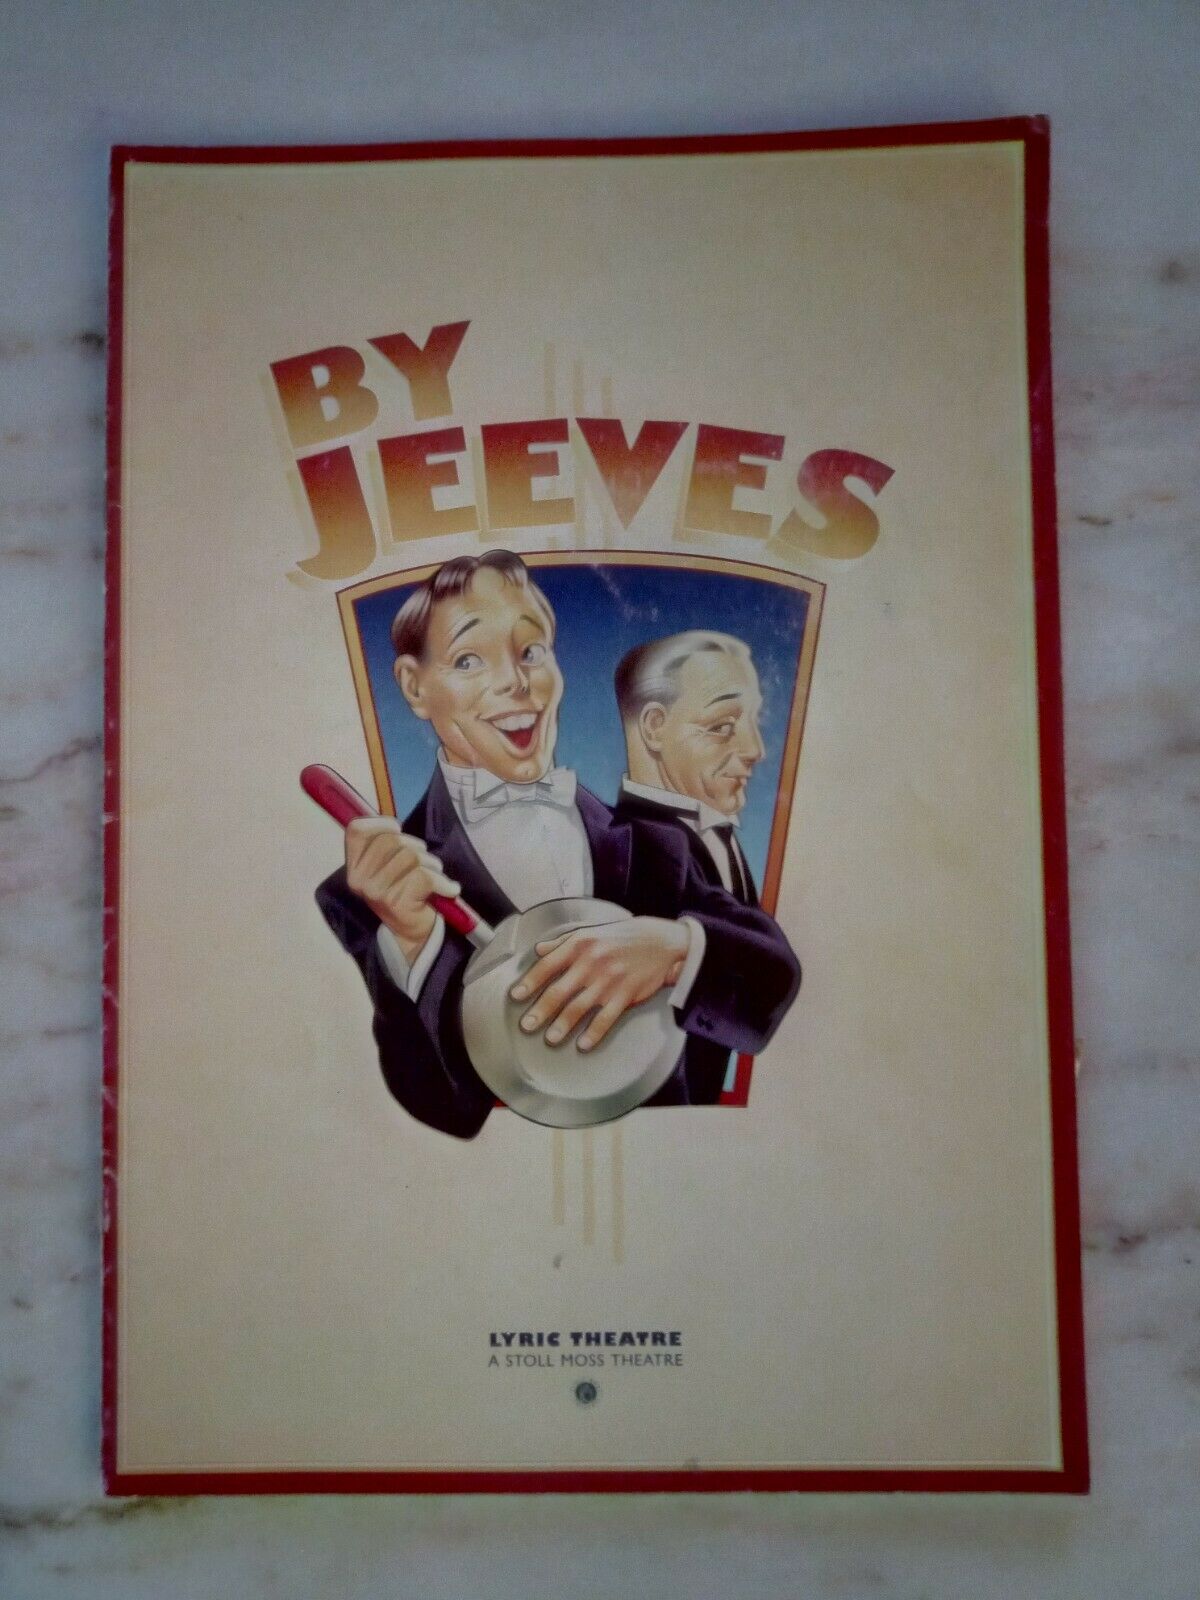 By Jeeves Program 1996 Lyric Theatre London Malcom Sinclair Steven Pacey